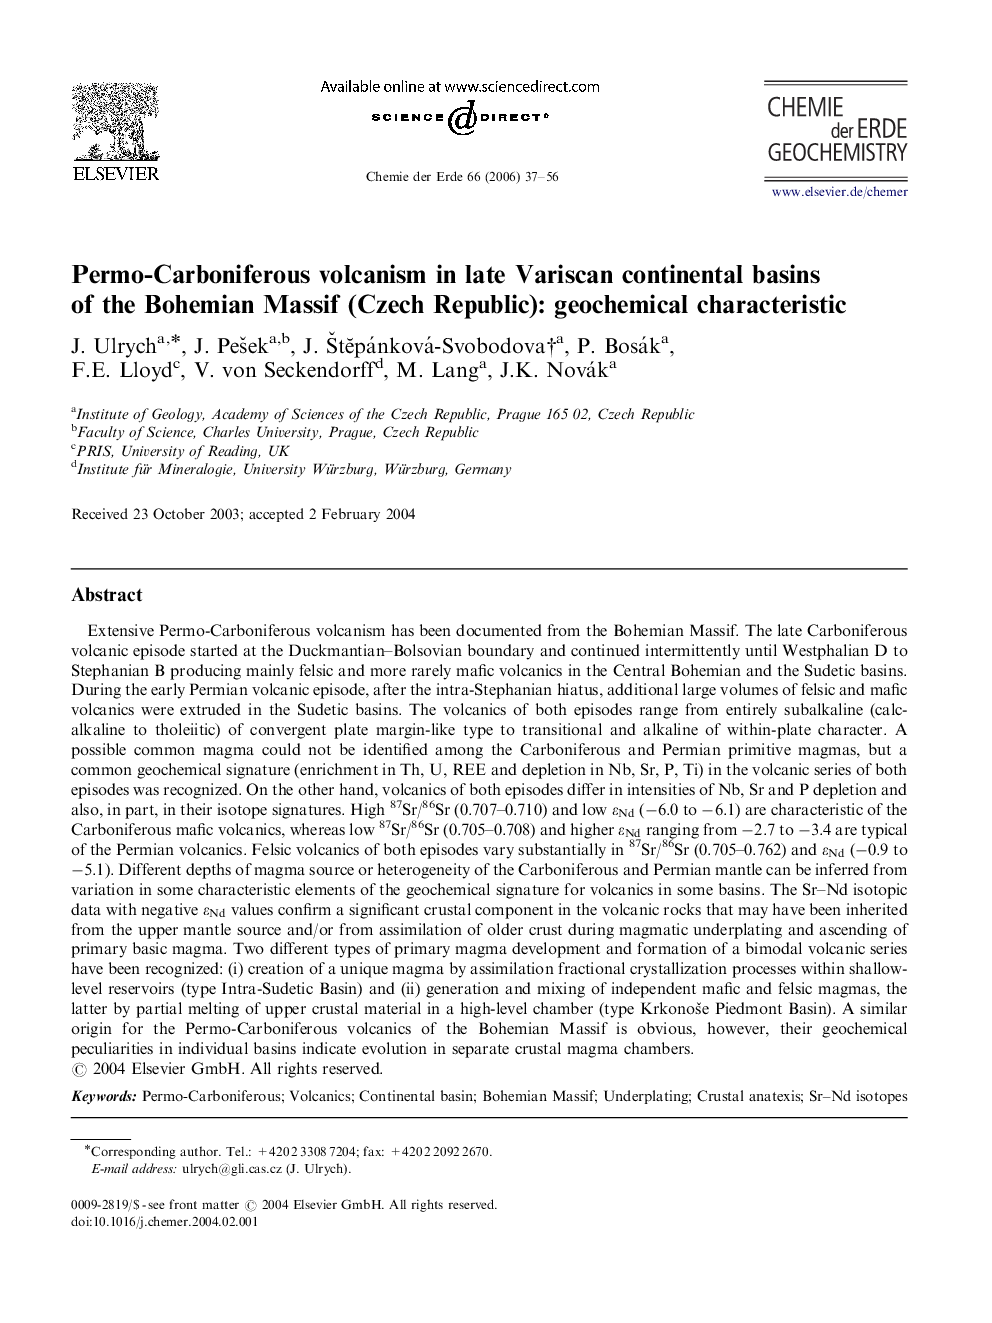 Permo-Carboniferous volcanism in late Variscan continental basins of the Bohemian Massif (Czech Republic): geochemical characteristic